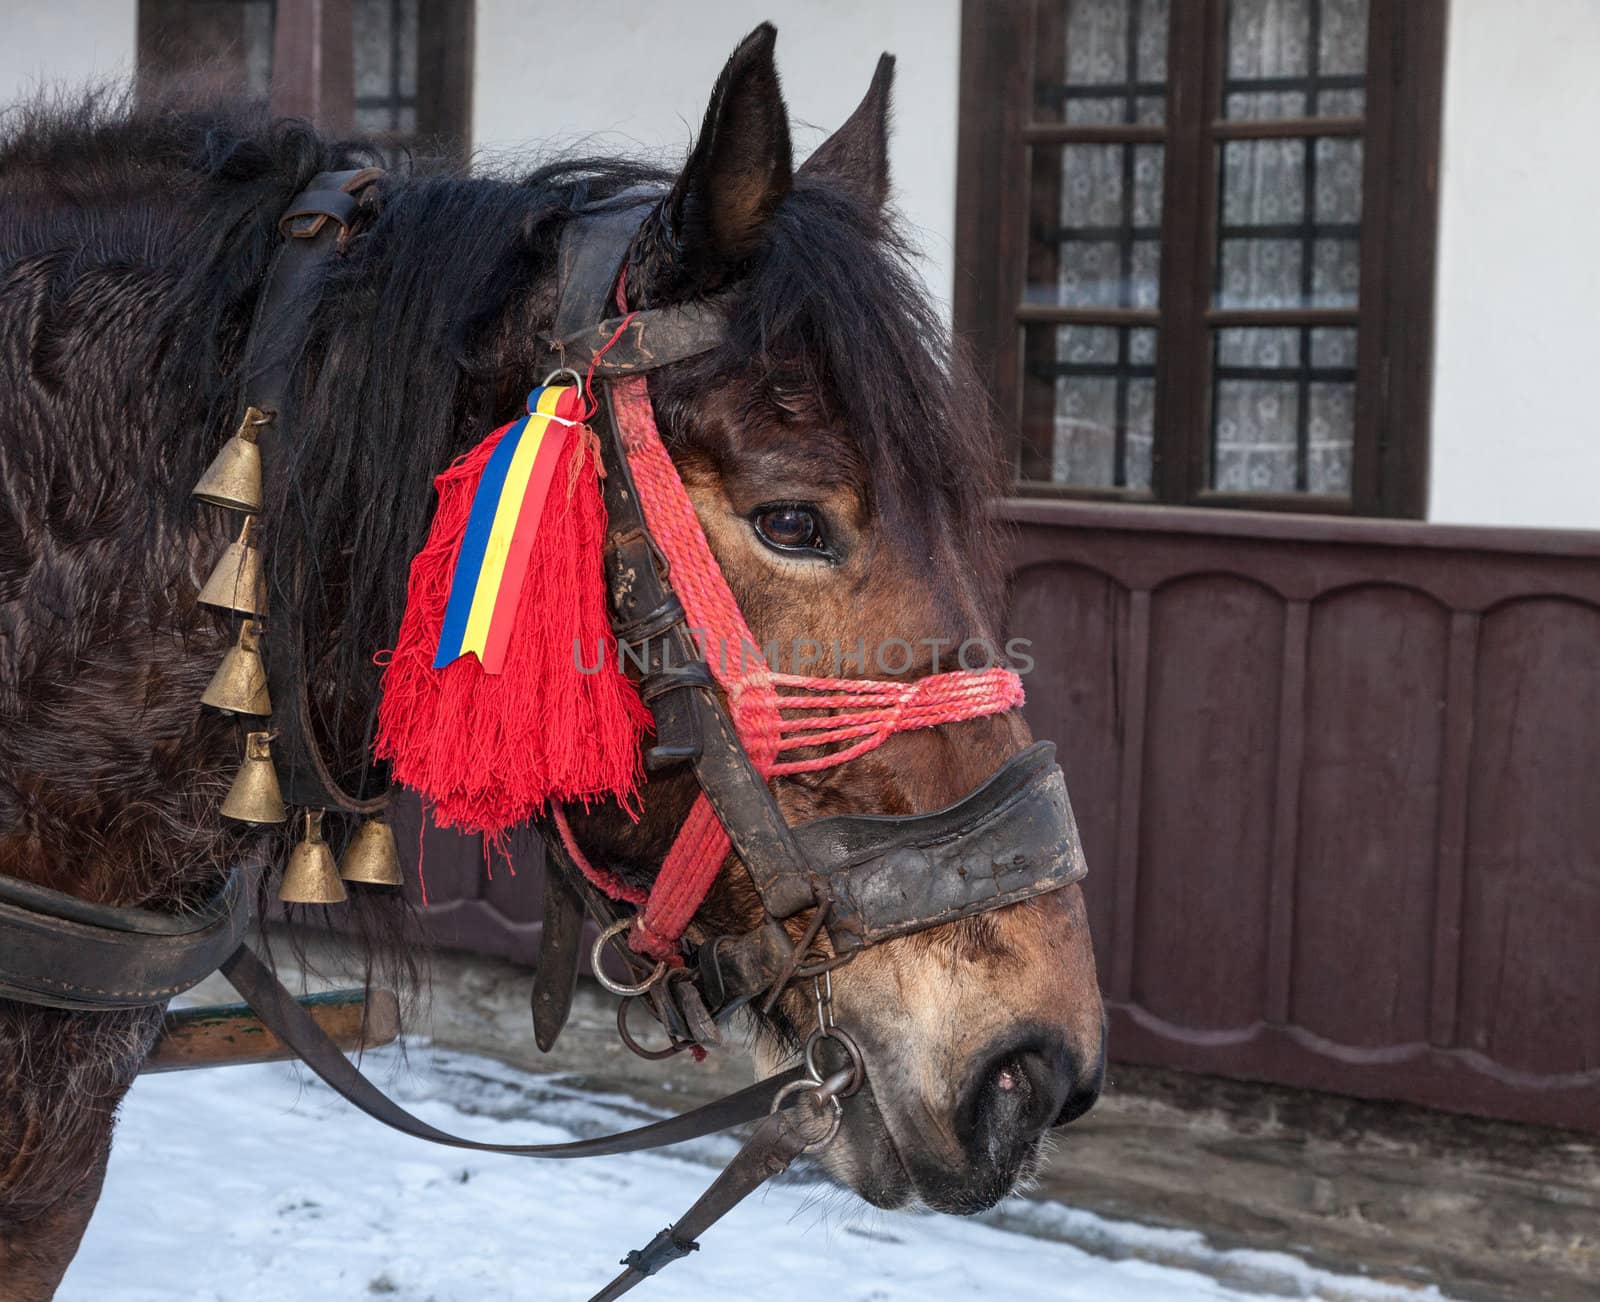 Porfile of a traditionally decorated Romanian horse used to pull the sledge during the winter holidays in various touristic villages.